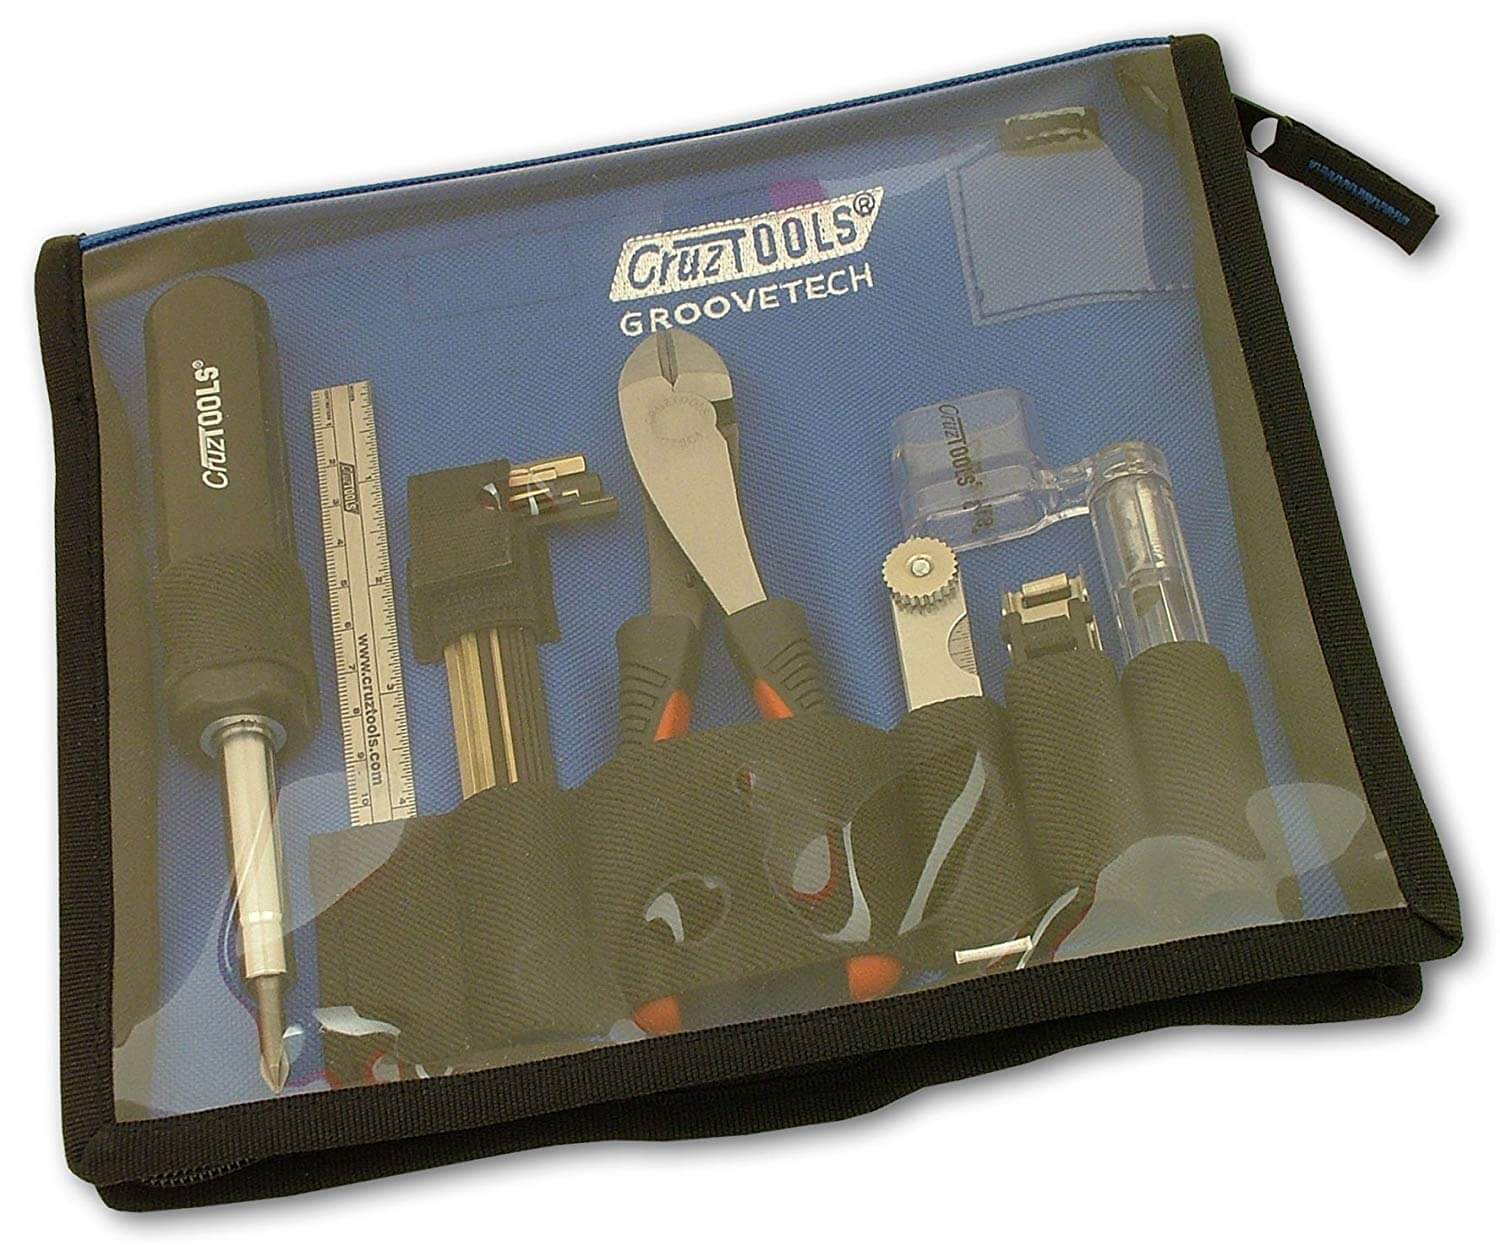 REVIEW: CruzTOOLS GrooveTech Guitar Player Tech Kit